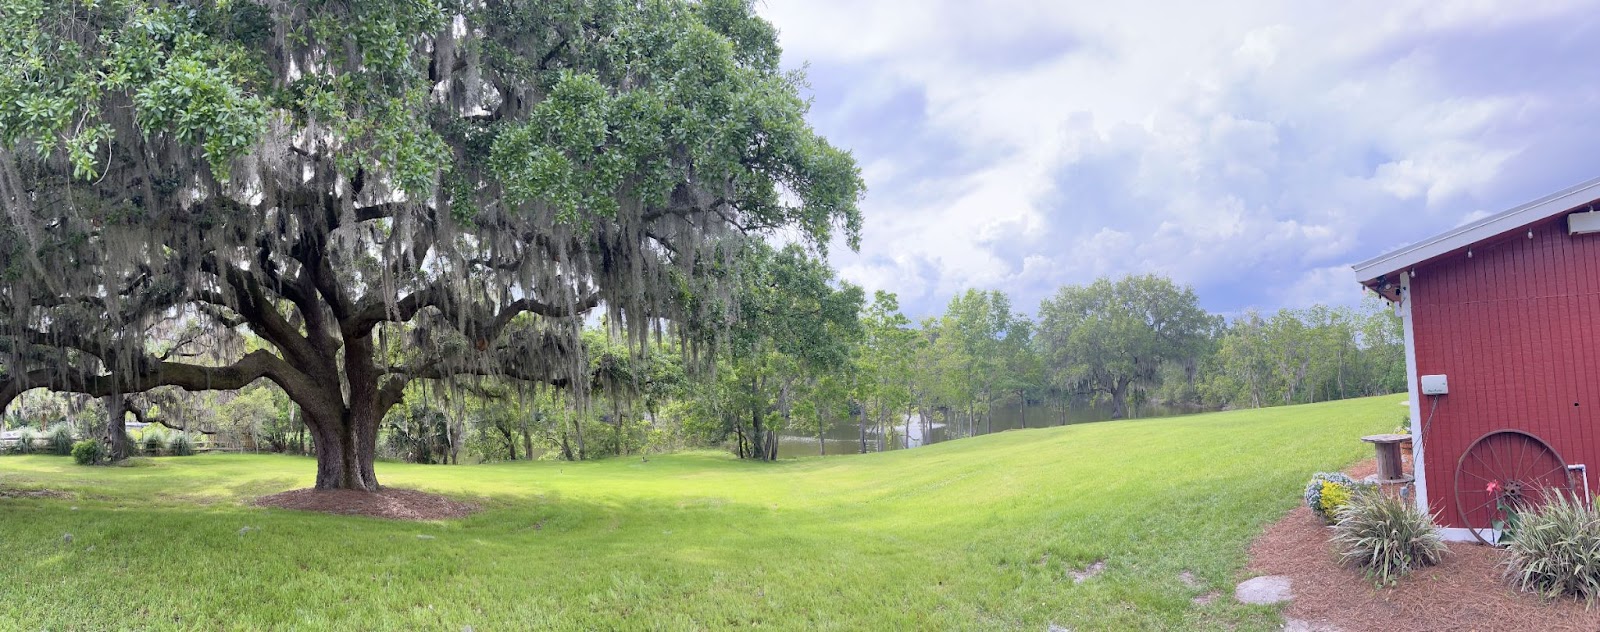 A grassy green field with a red barn and a large oak tree covered in Spanish moss.